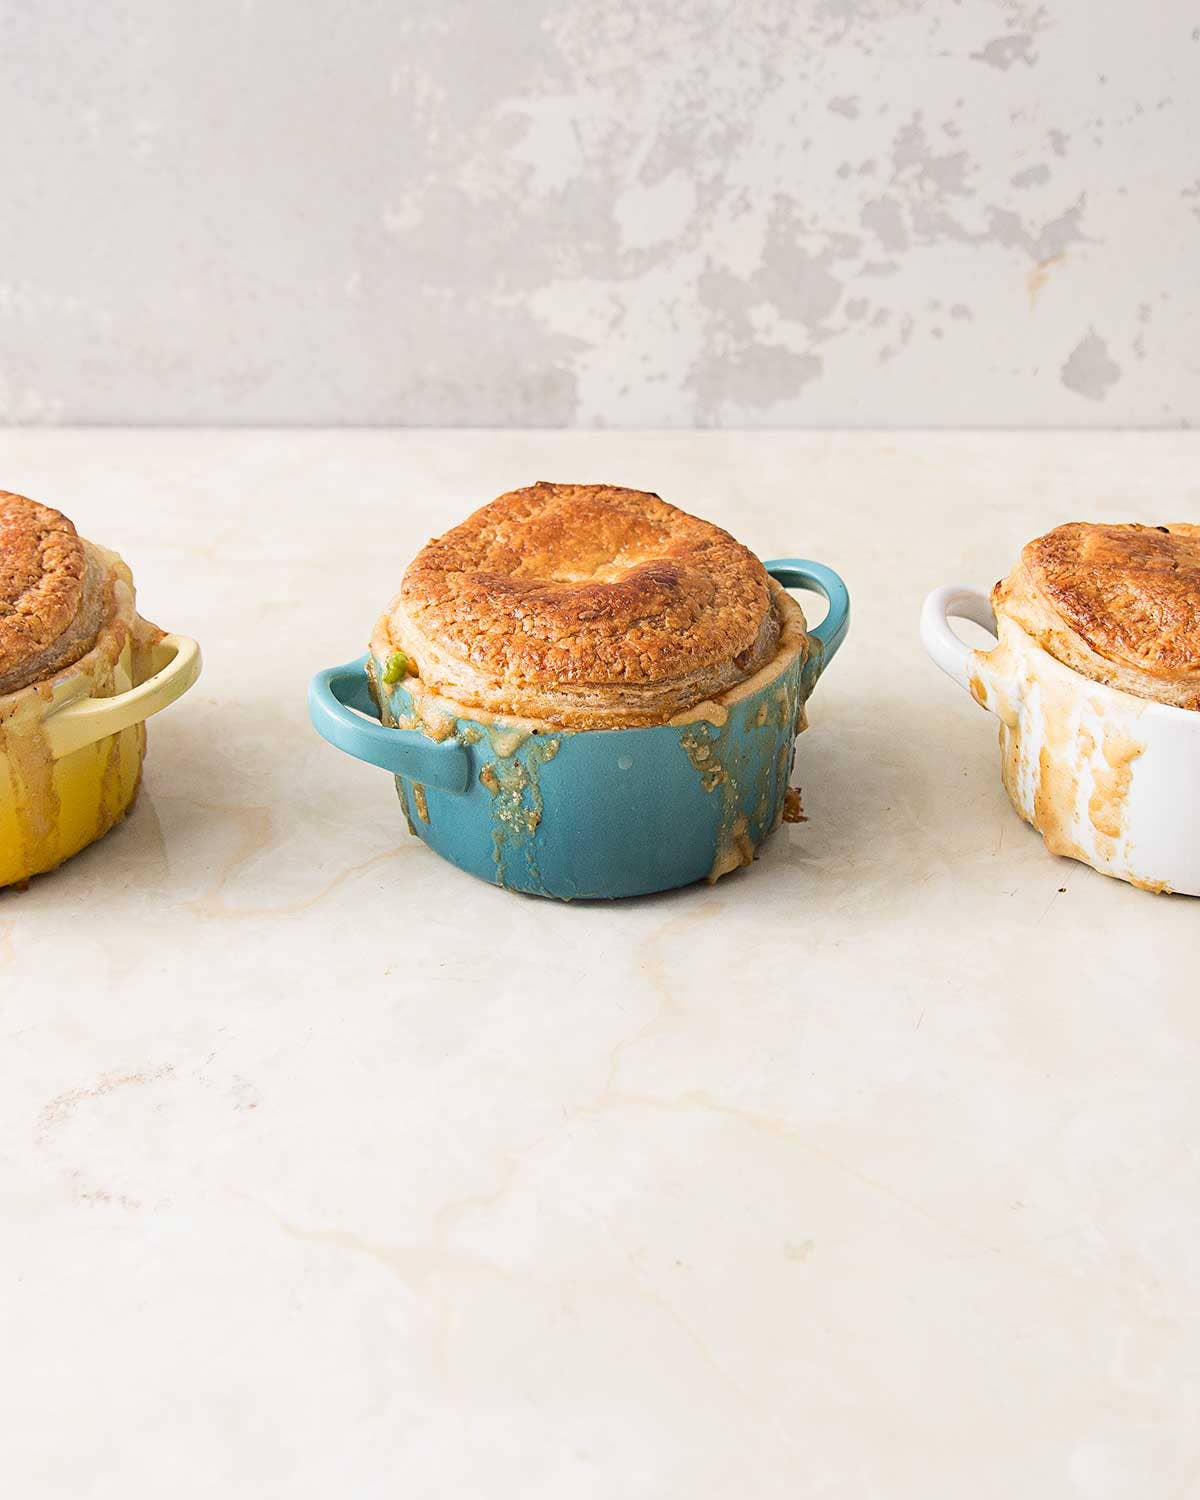 Top Your Pot Pie With Puff Pastry and Mashed Potatoes